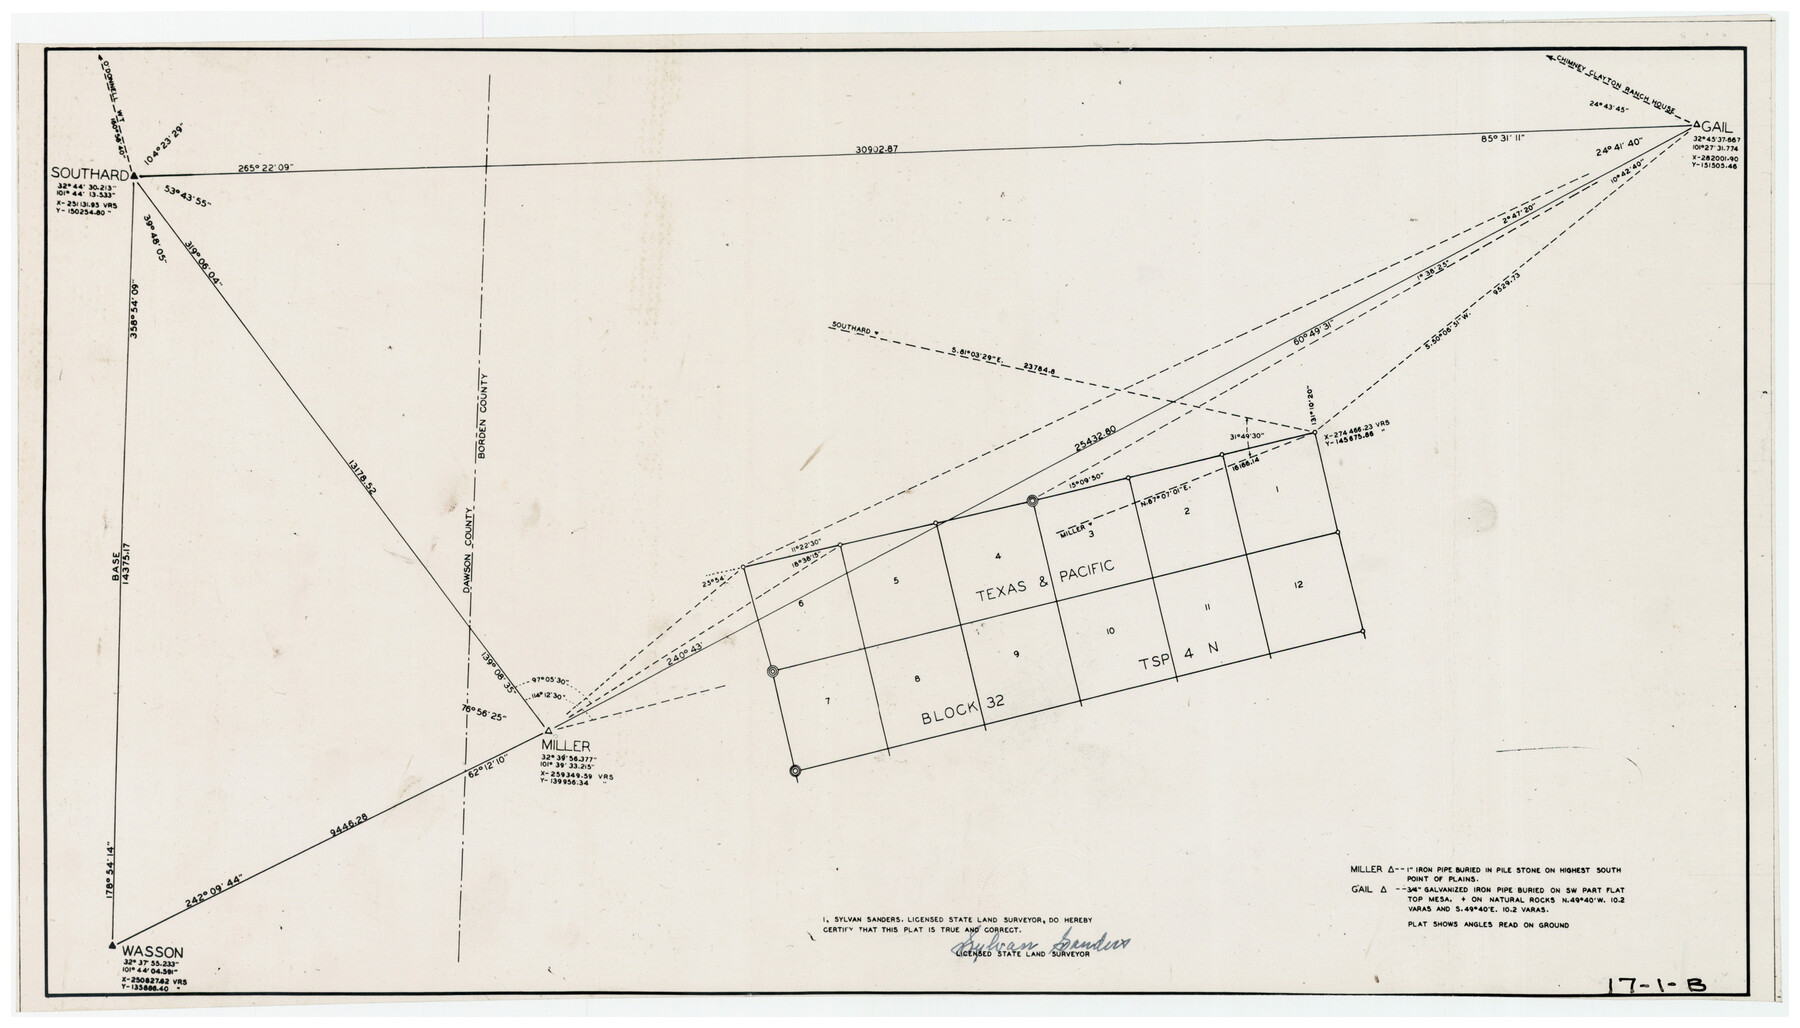 90142, [Texas & Pacific Block 32, T-4-N showing ties to triangulation stations], Twichell Survey Records